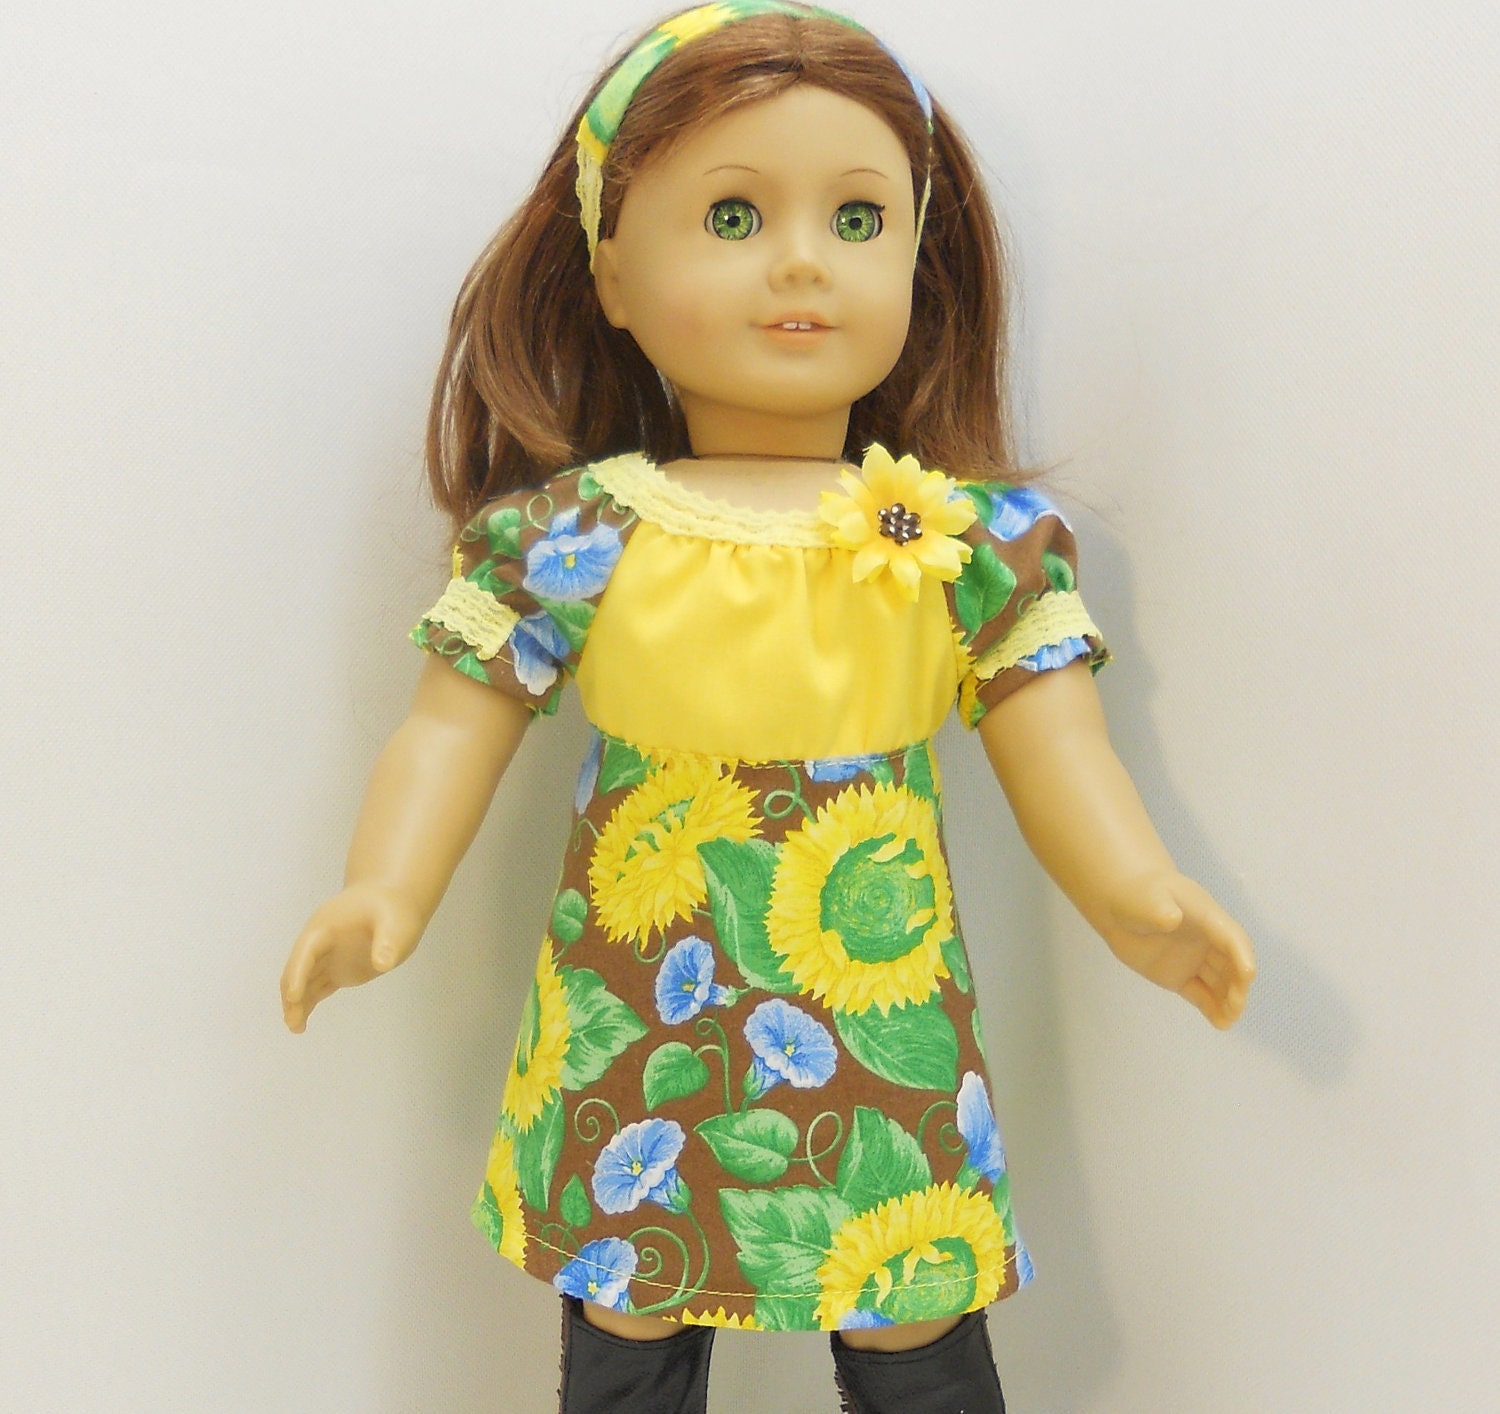 American Girl Doll Clothes Peasant Dress 3 pc Set  fit 18" dolls  Yellow Sunflowers on Brown